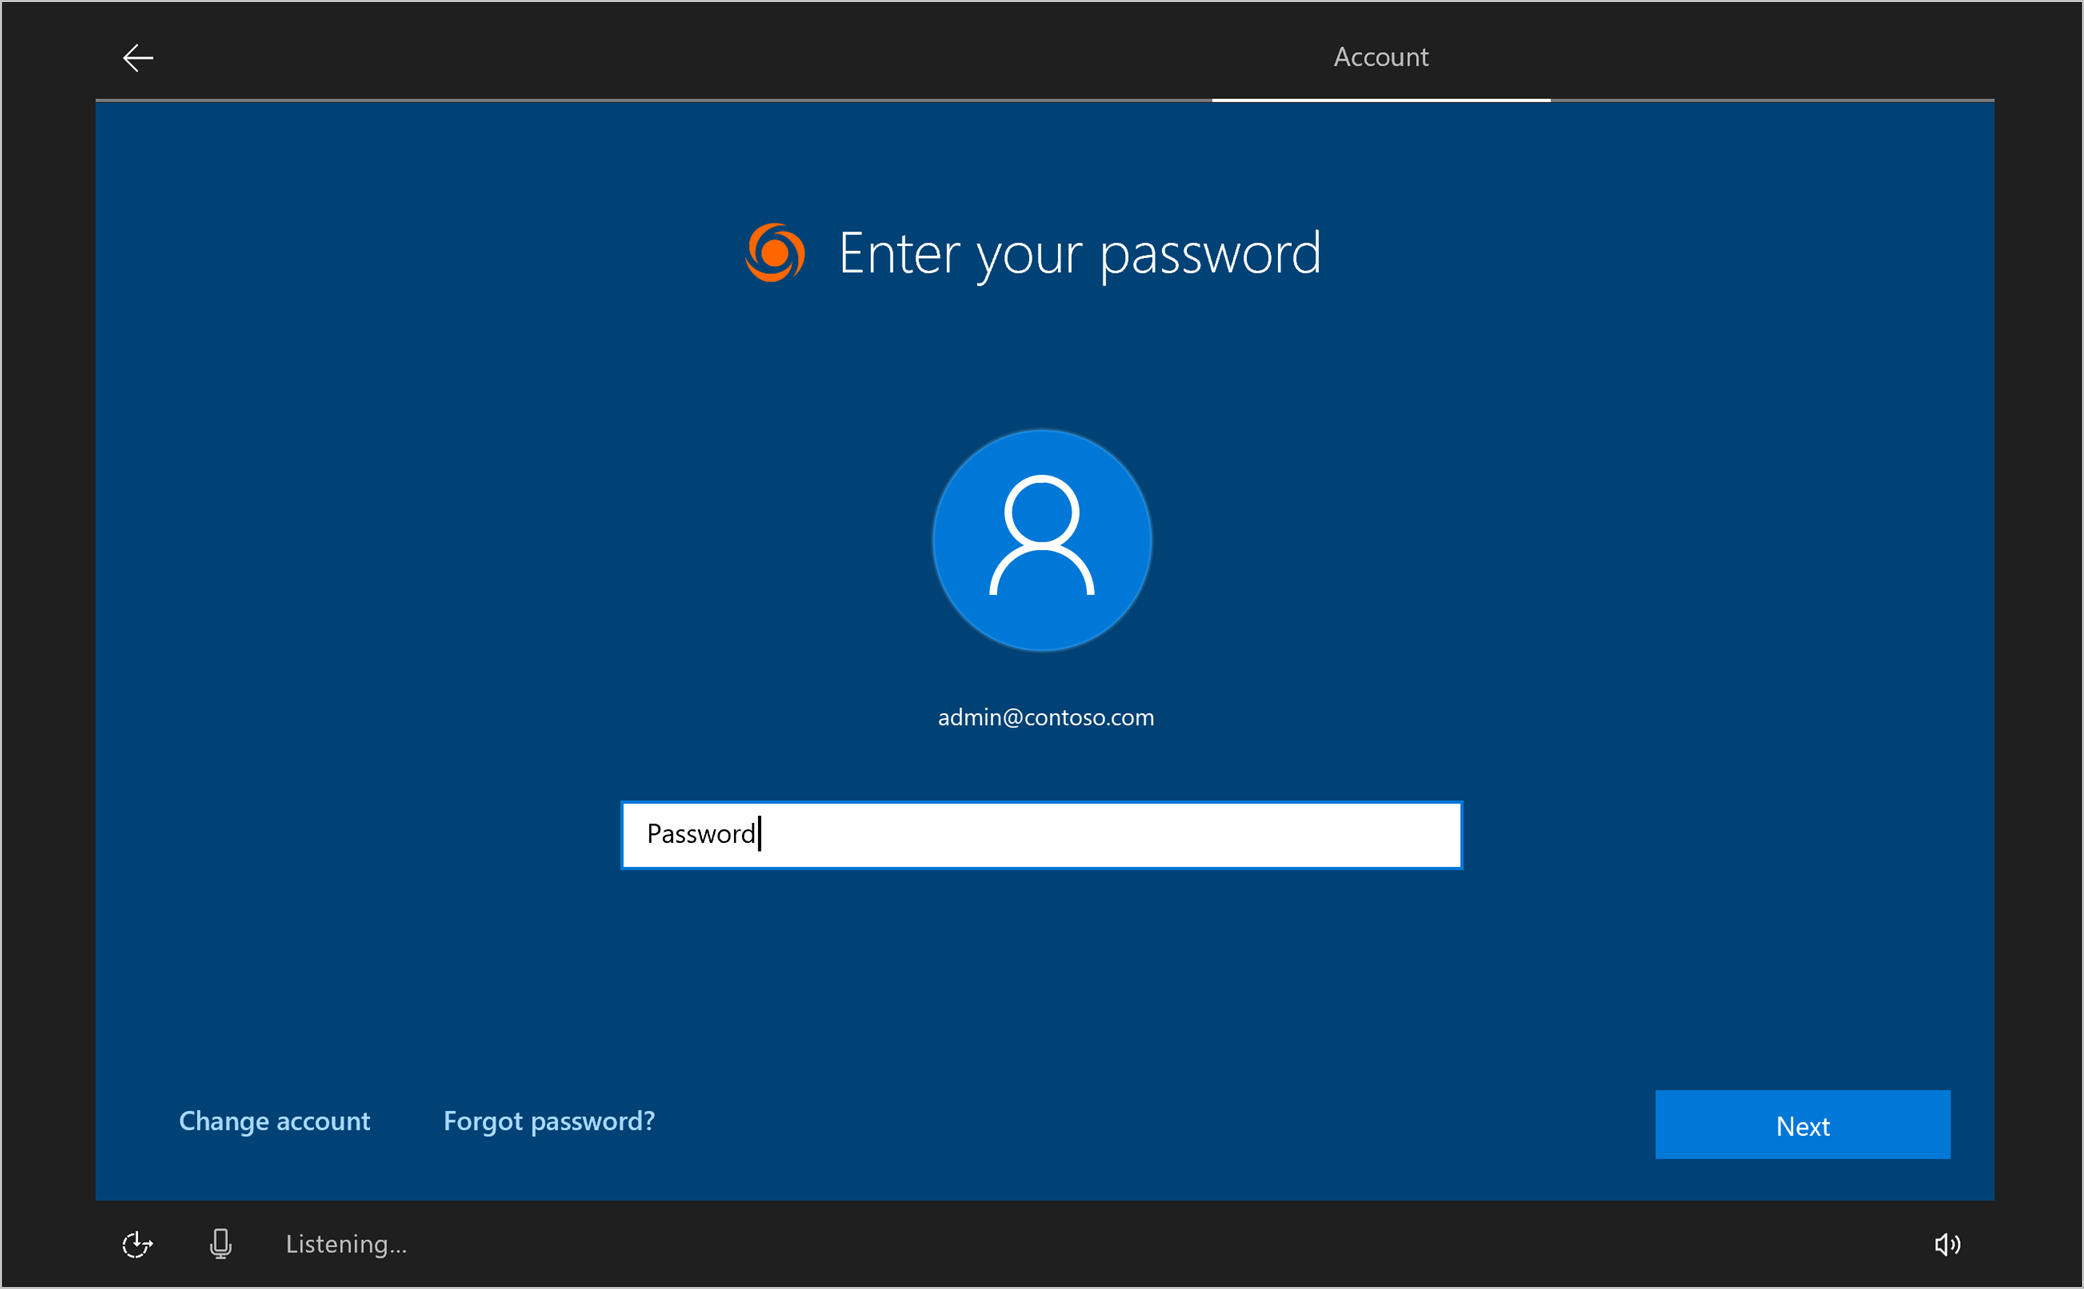 Example screenshot of the Enter your password screen, with your organization's logo, and an empty Password field.